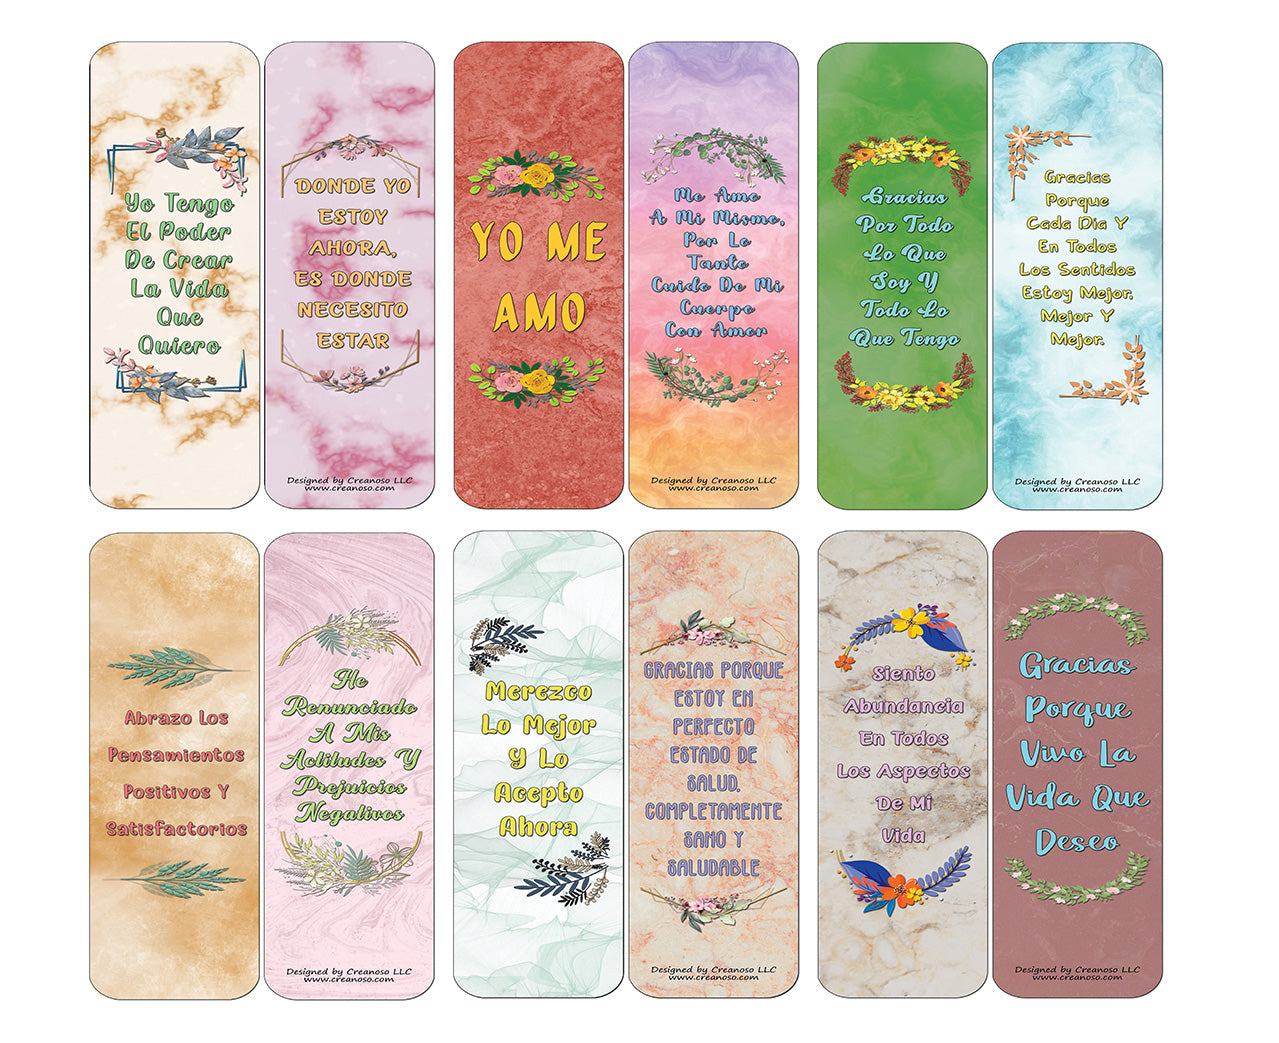 Creanoso Spanish Afirmaciones Positivas Bookmarks Cards Series 1 (30-Pack) - La Actitud Mental Positiva - Stocking Stuffers Party Favors & Giveaways for Teens & Adults